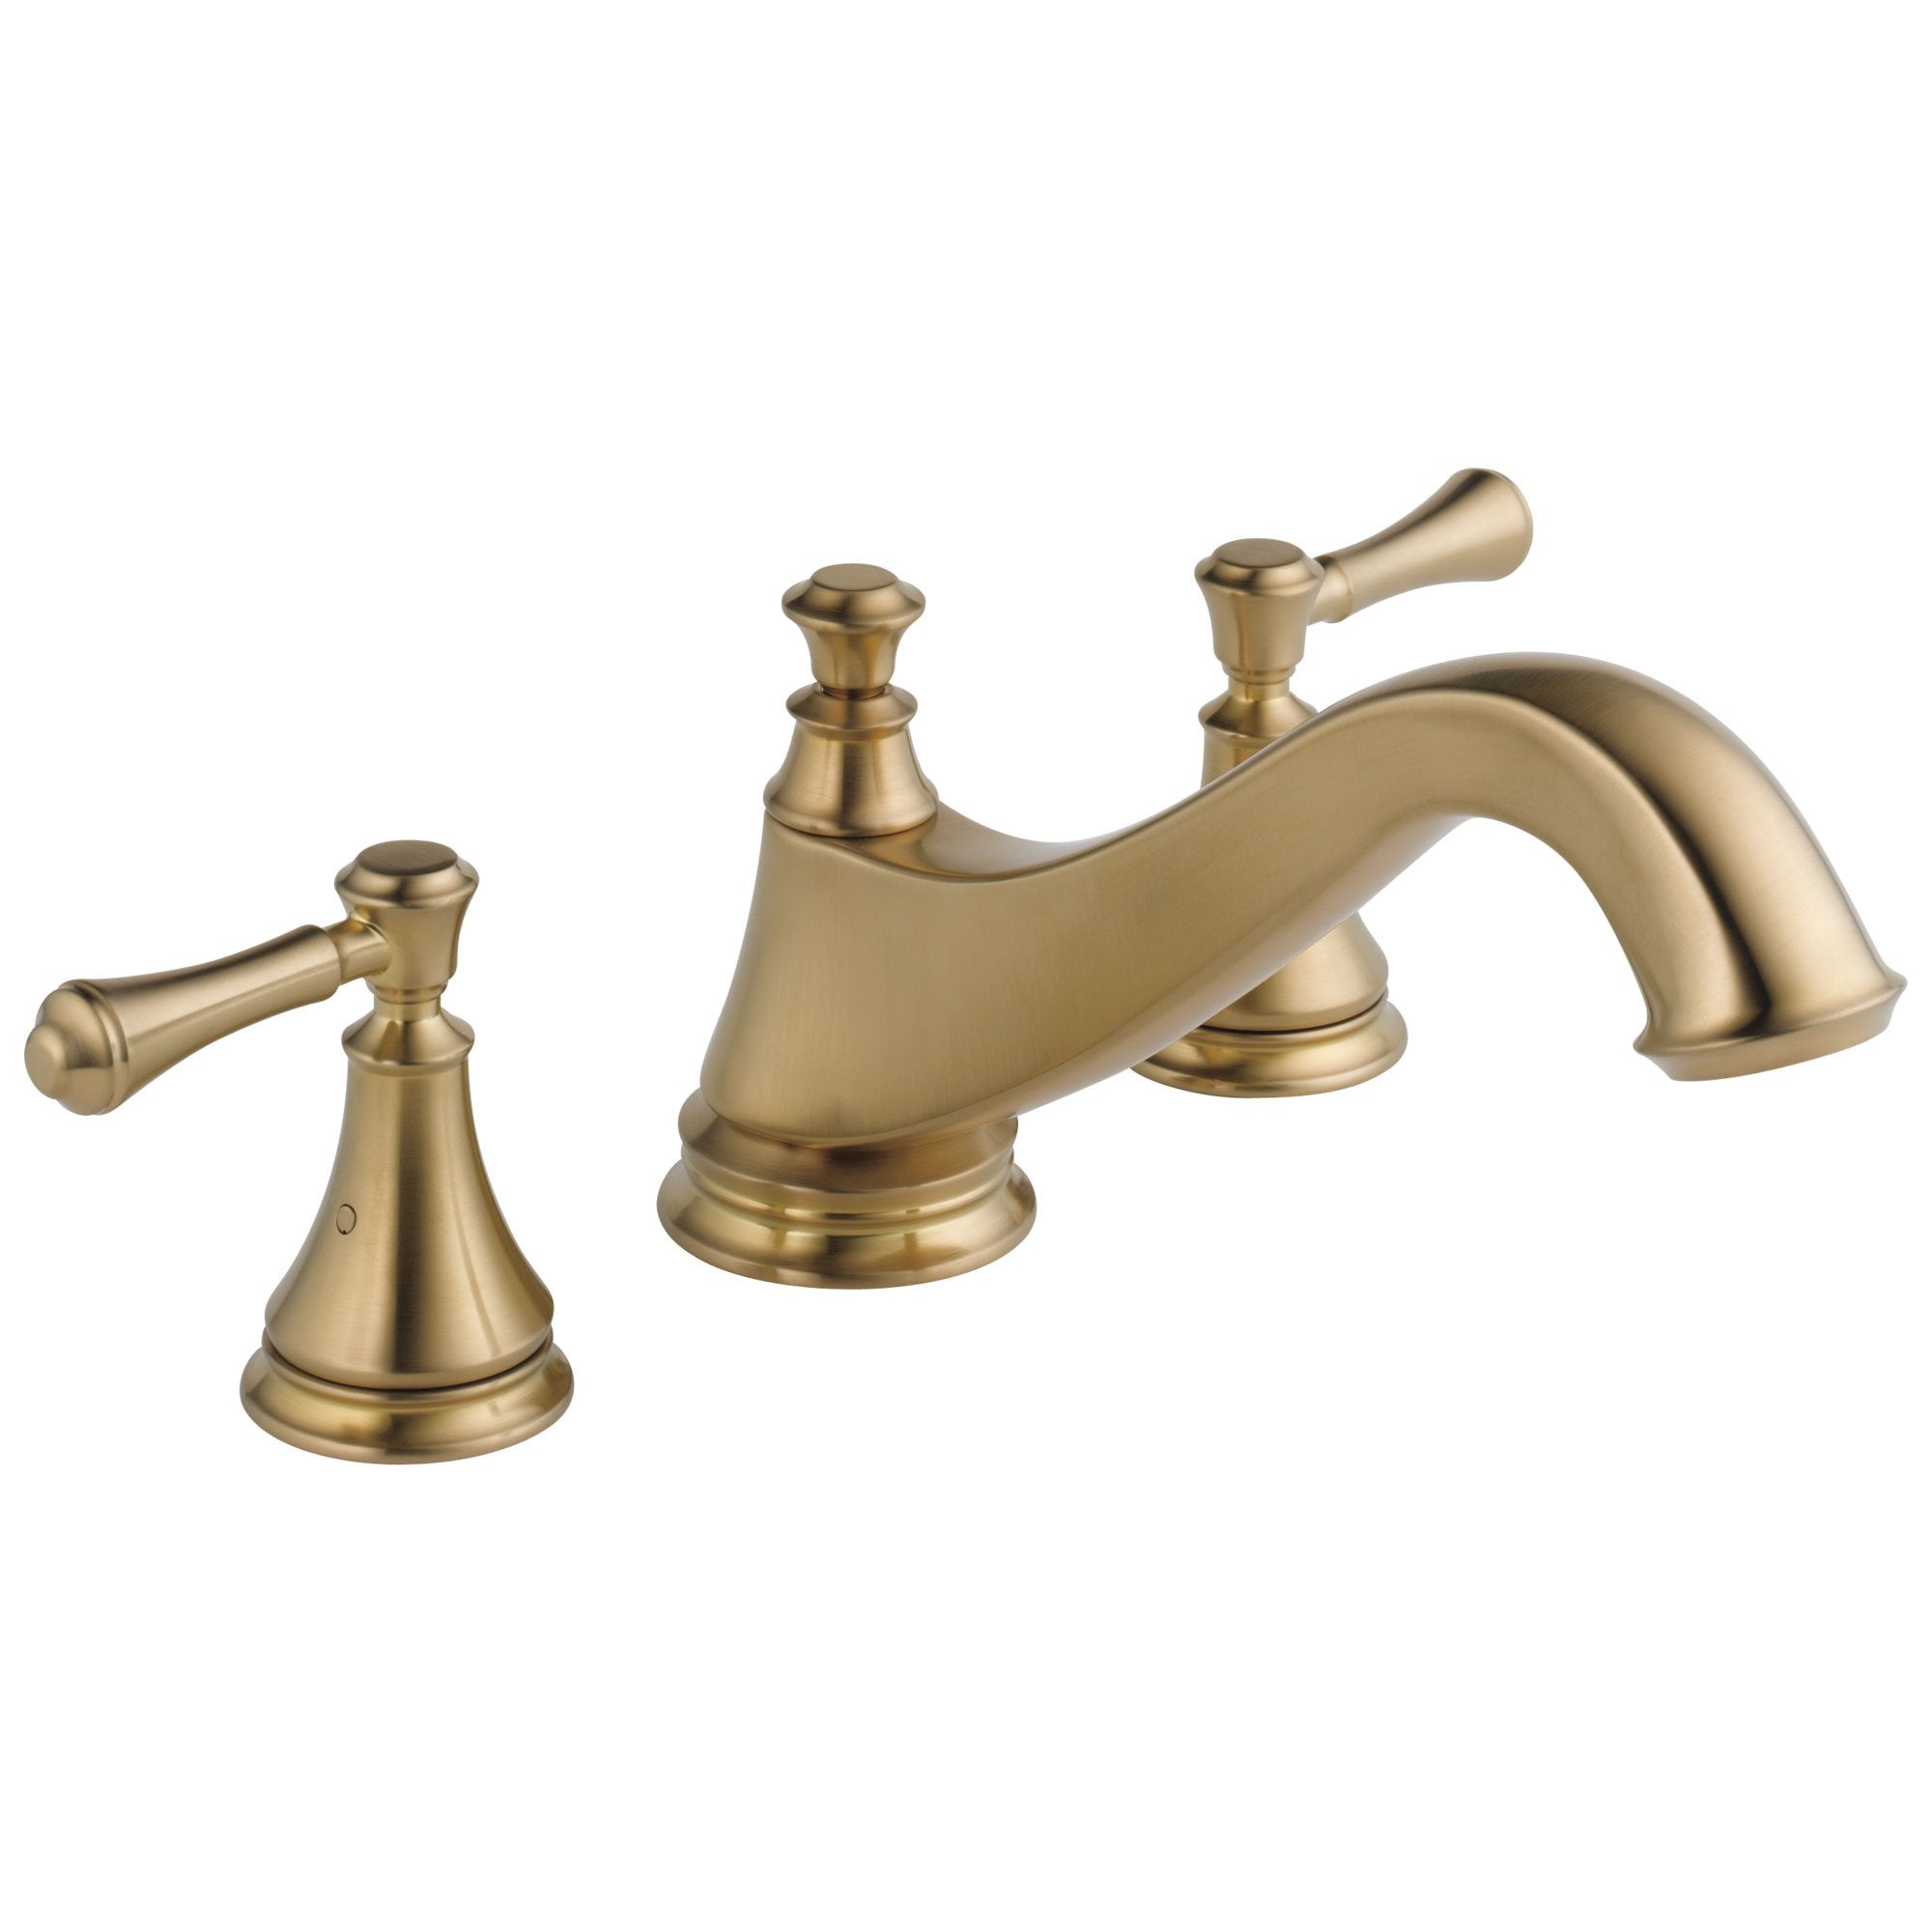 Delta Cassidy Collection Champagne Bronze Finish Traditional Spout Roman Tub Filler Faucet COMPLETE ITEM Includes (2) Lever Handles and Rough-in Valve D1455V